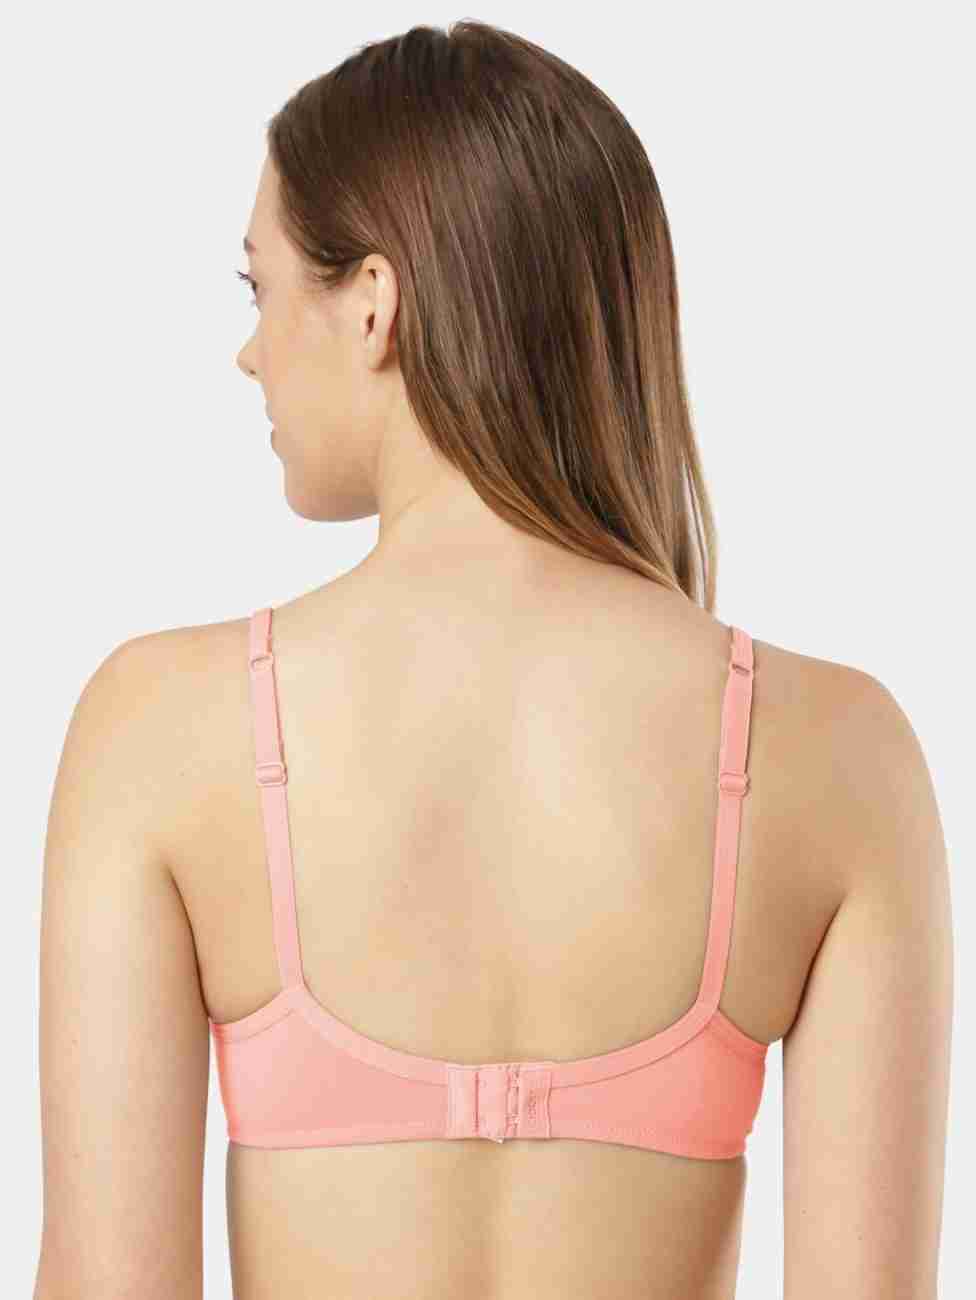 Buy Women's Wirefree Padded Super Combed Cotton Elastane Stretch Medium  Coverage Lace Styling T-Shirt Bra with Adjustable Straps - Candlelight Peach  1723